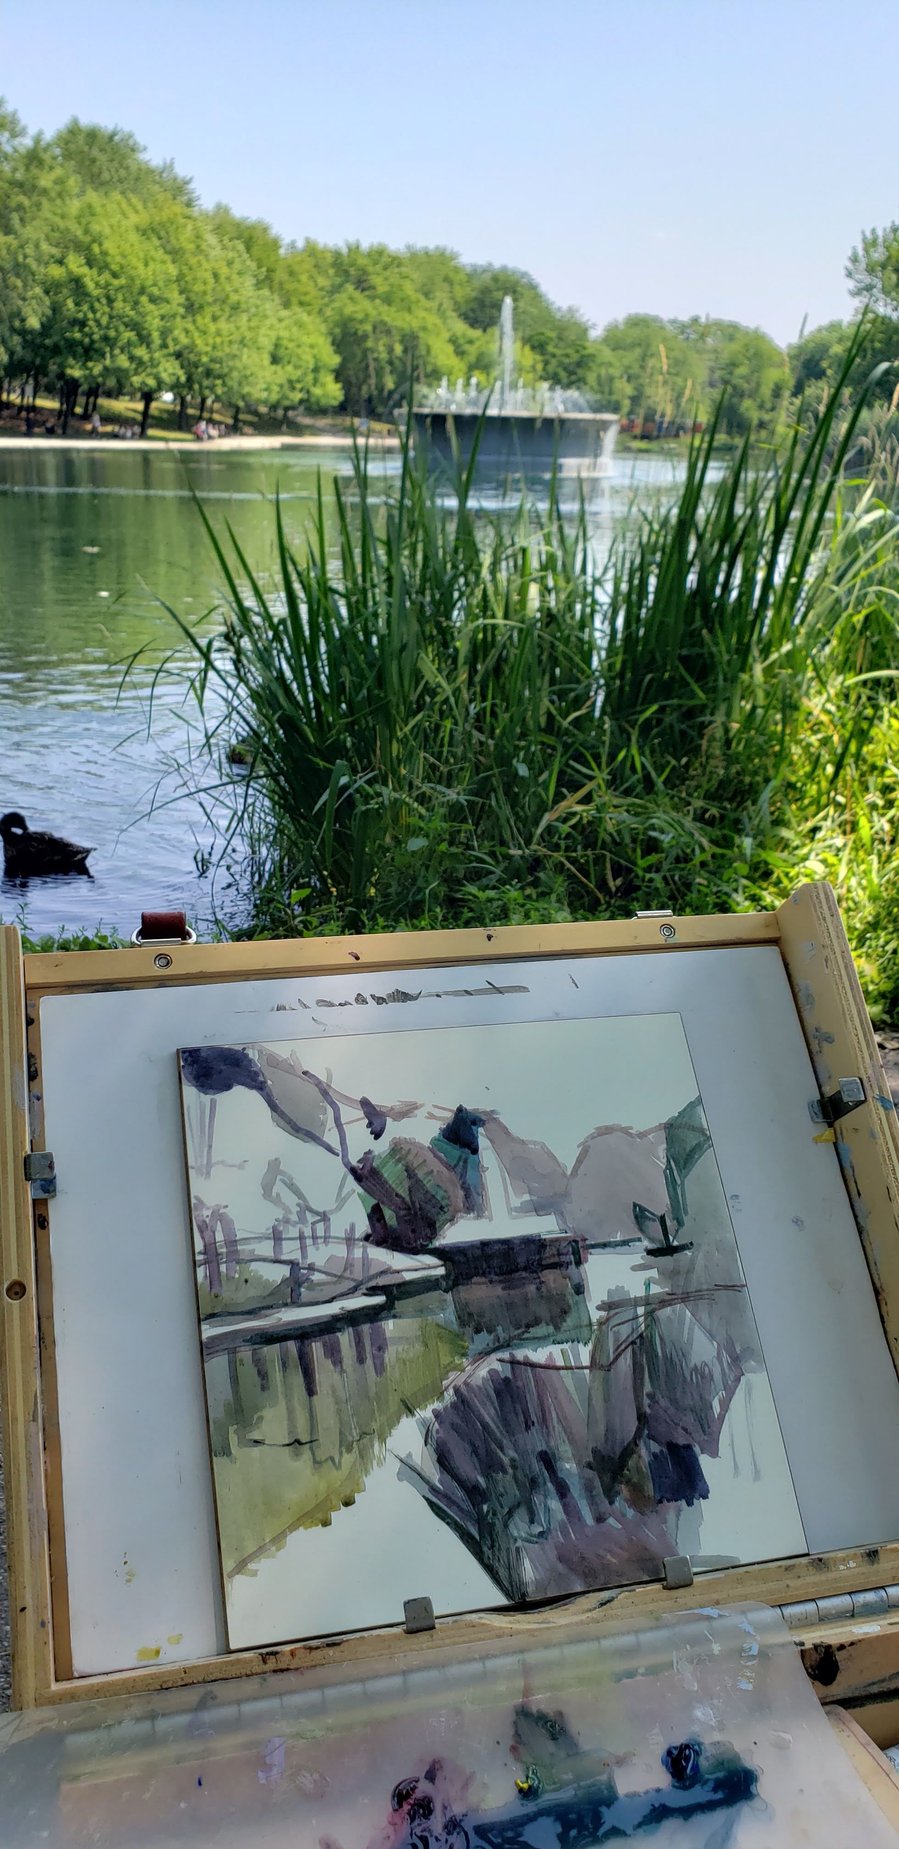 Pochade travel painting box set up in Parc Fontaine for a painting session, 2019.